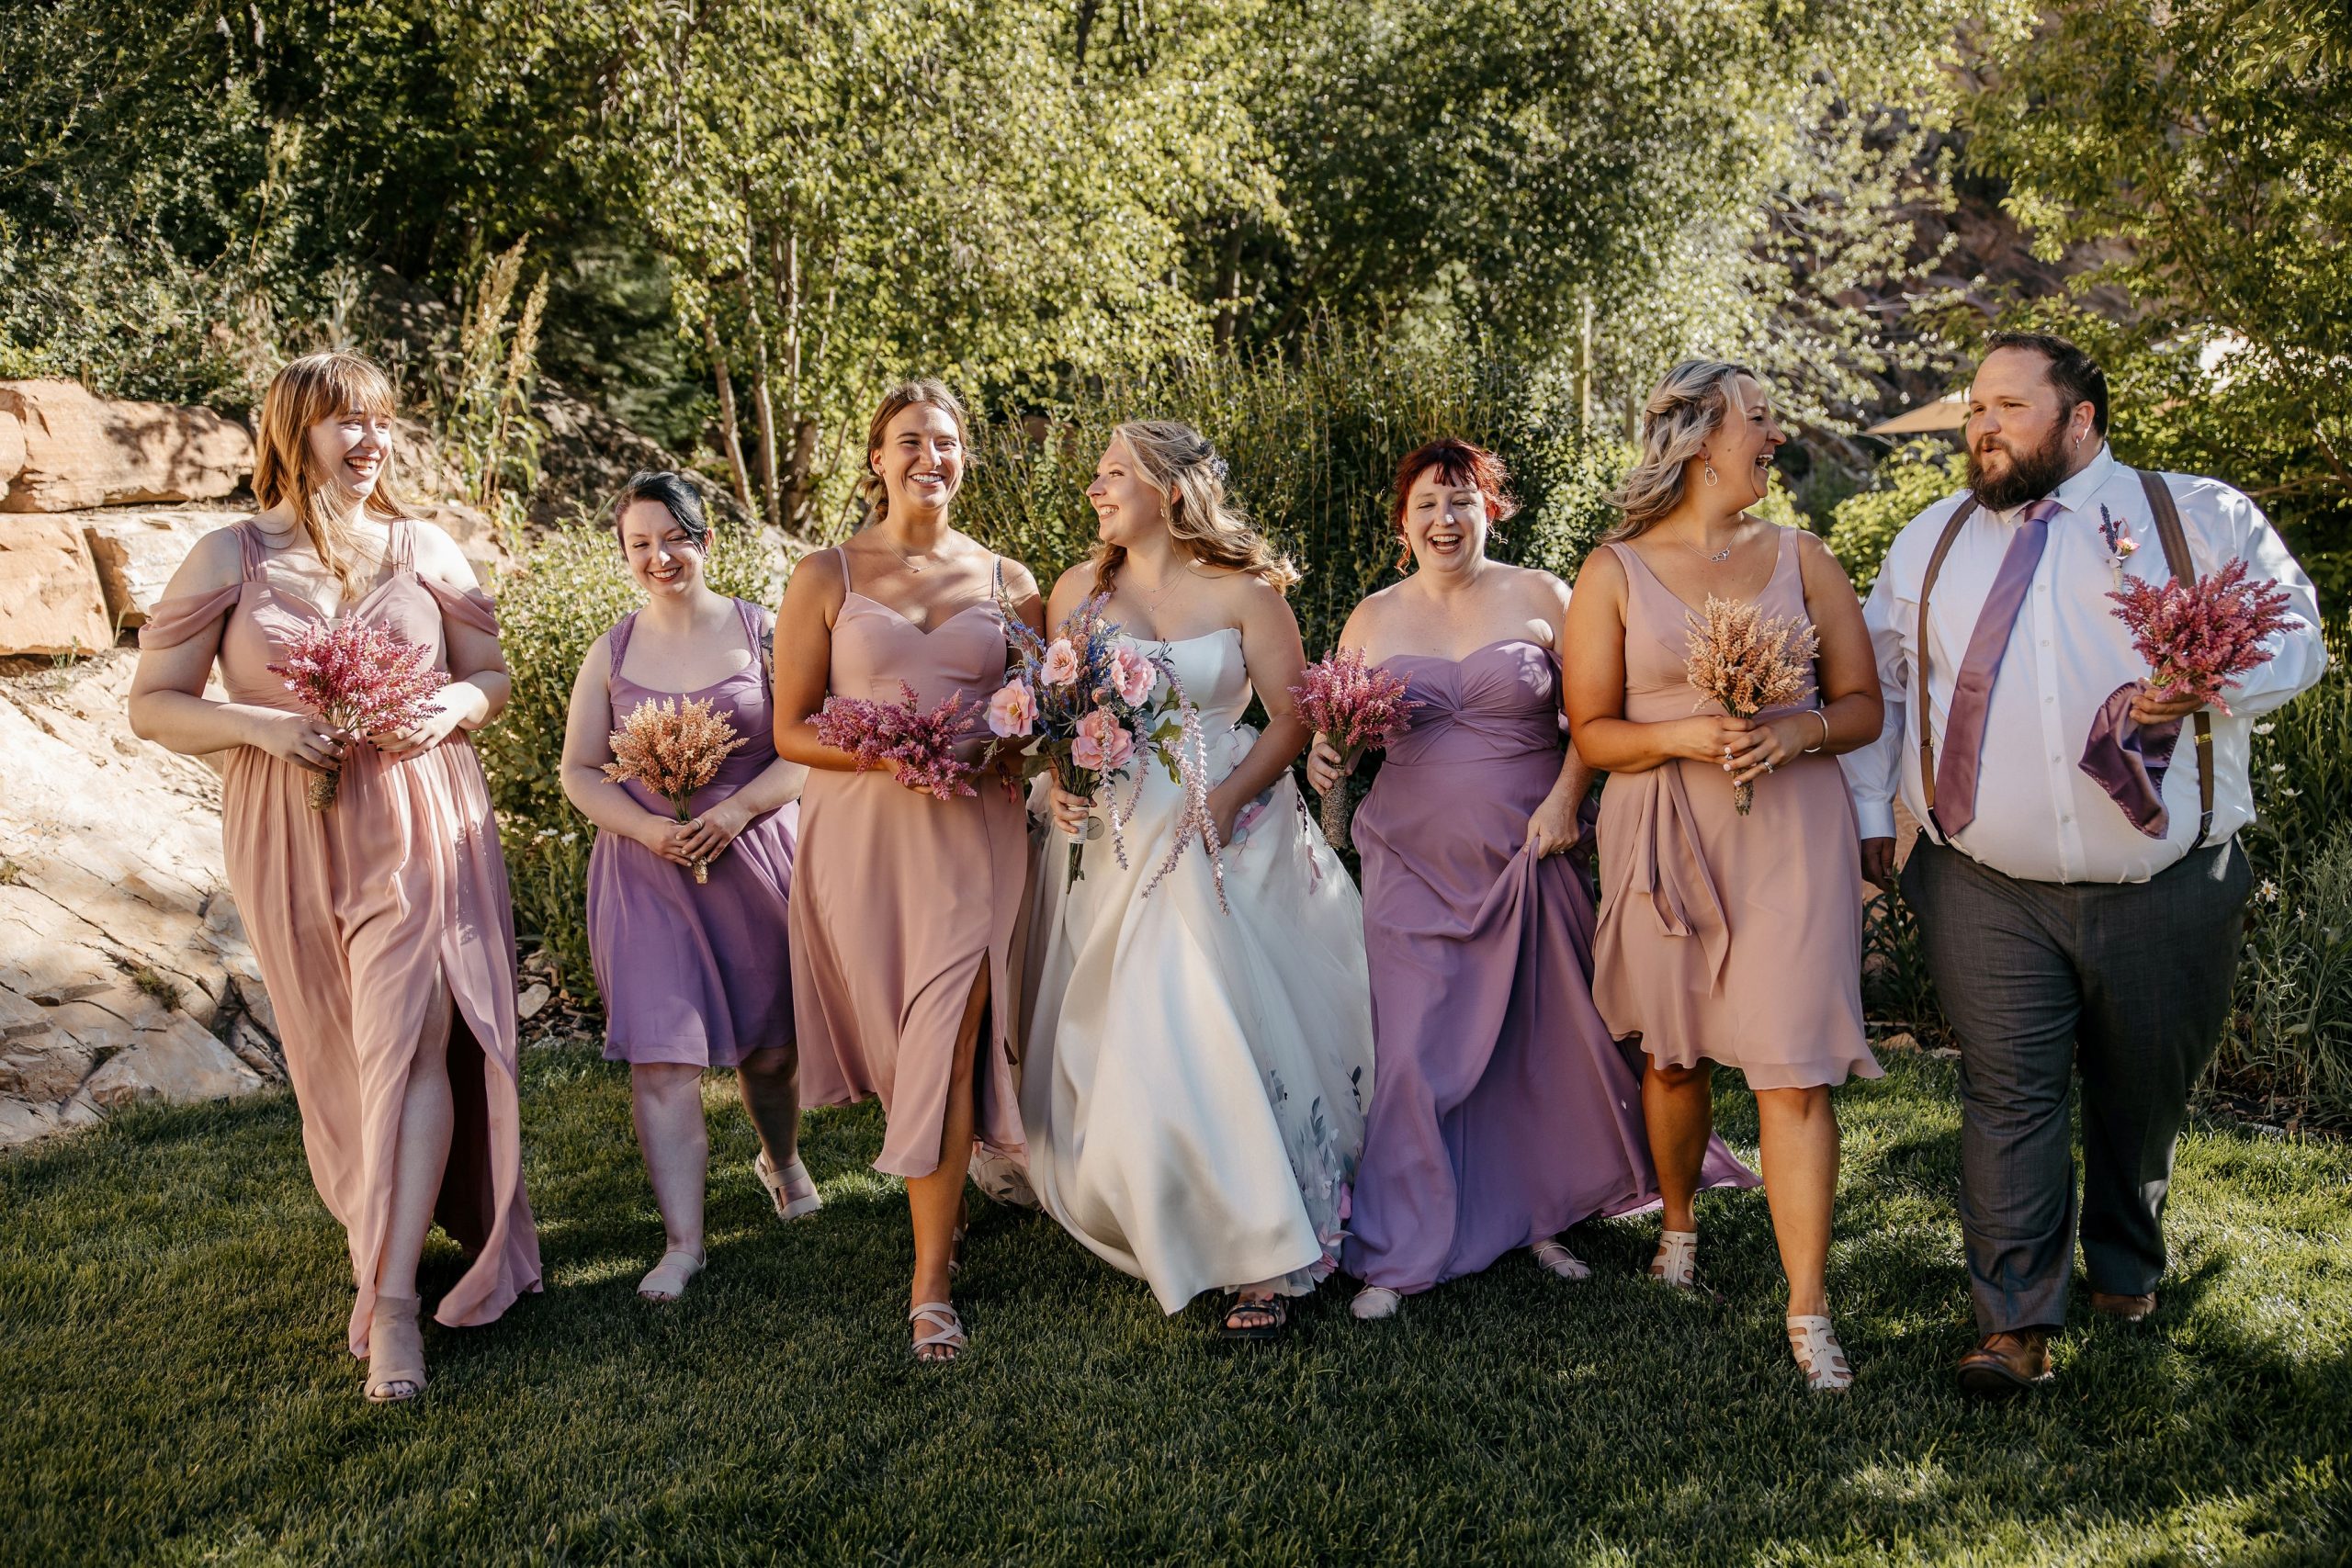 Bride In Simple Wedding Dress Called Selena By Maggie Sottero With Bridesmaids In Pinks And Purples